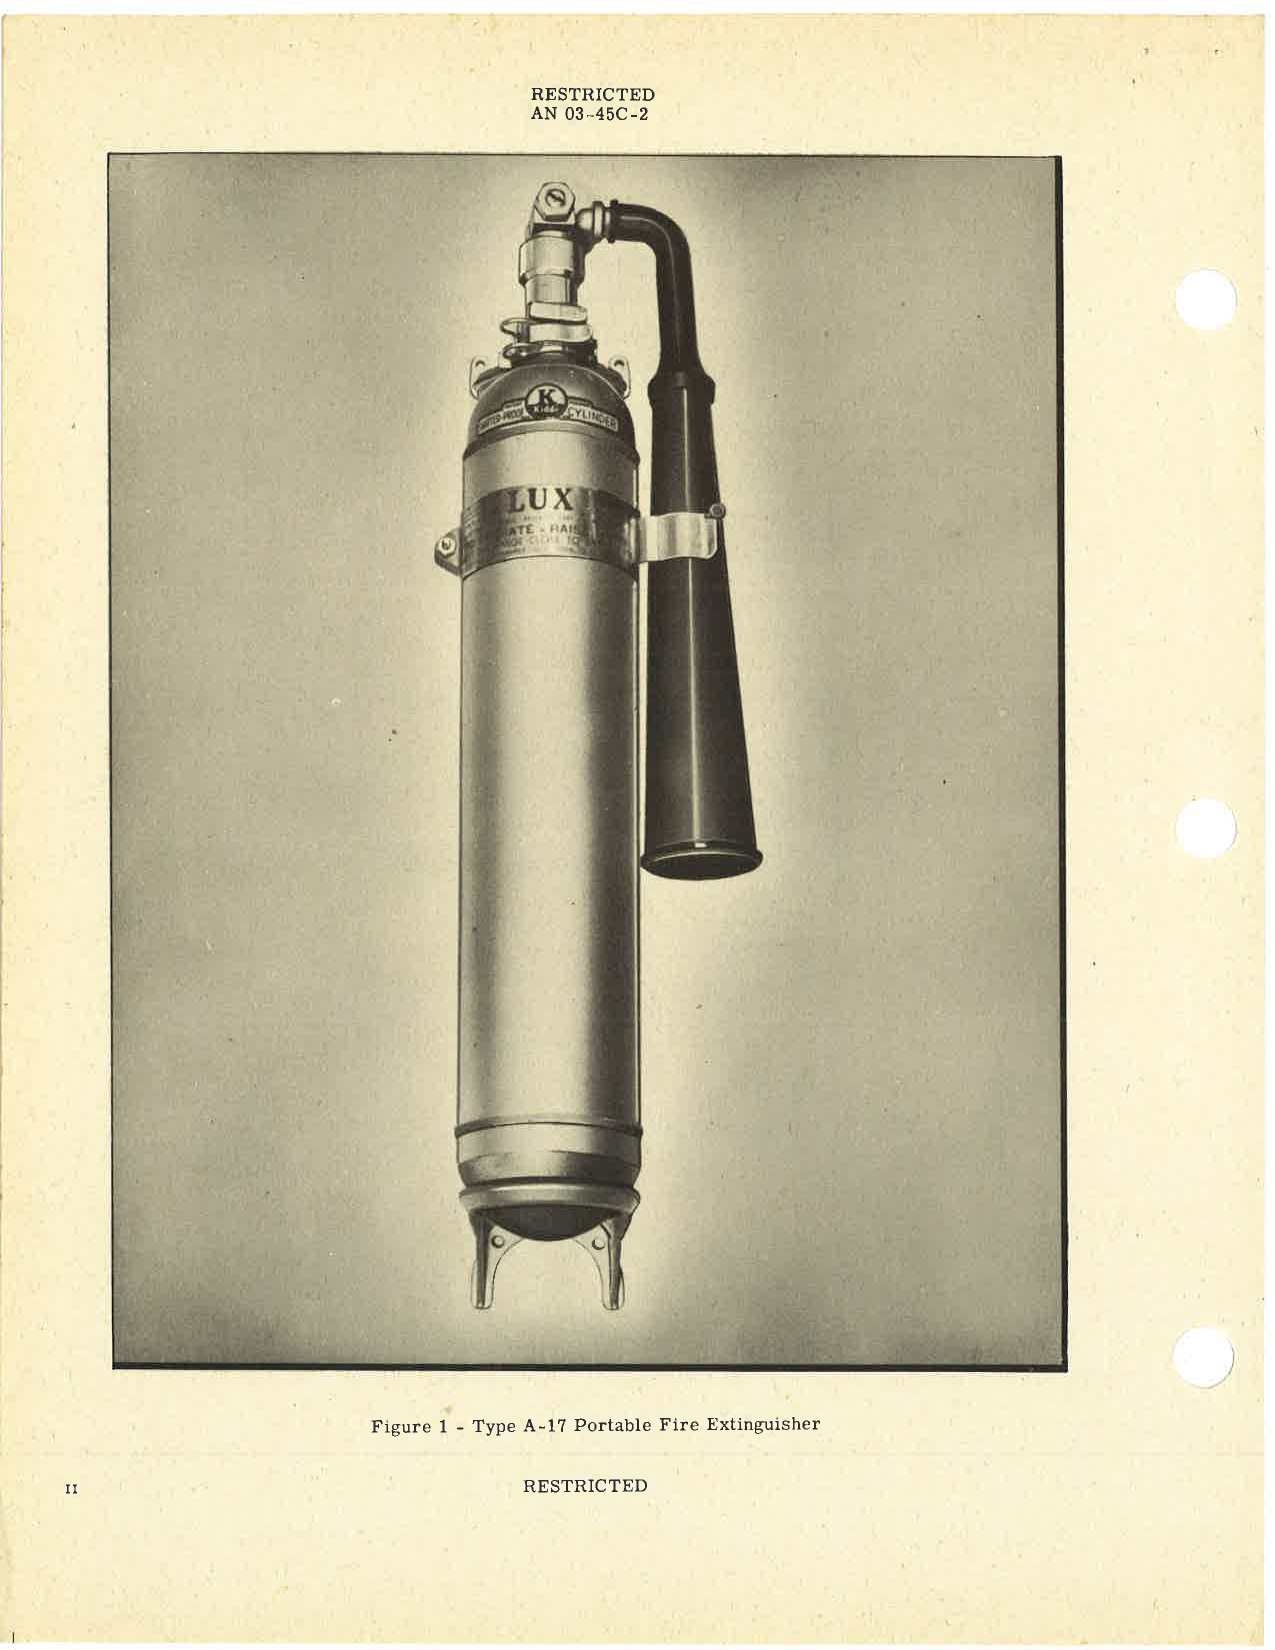 Sample page 4 from AirCorps Library document: Handbook of Instructions with Parts Catalog for A-17 Portable Fire Extinguisher